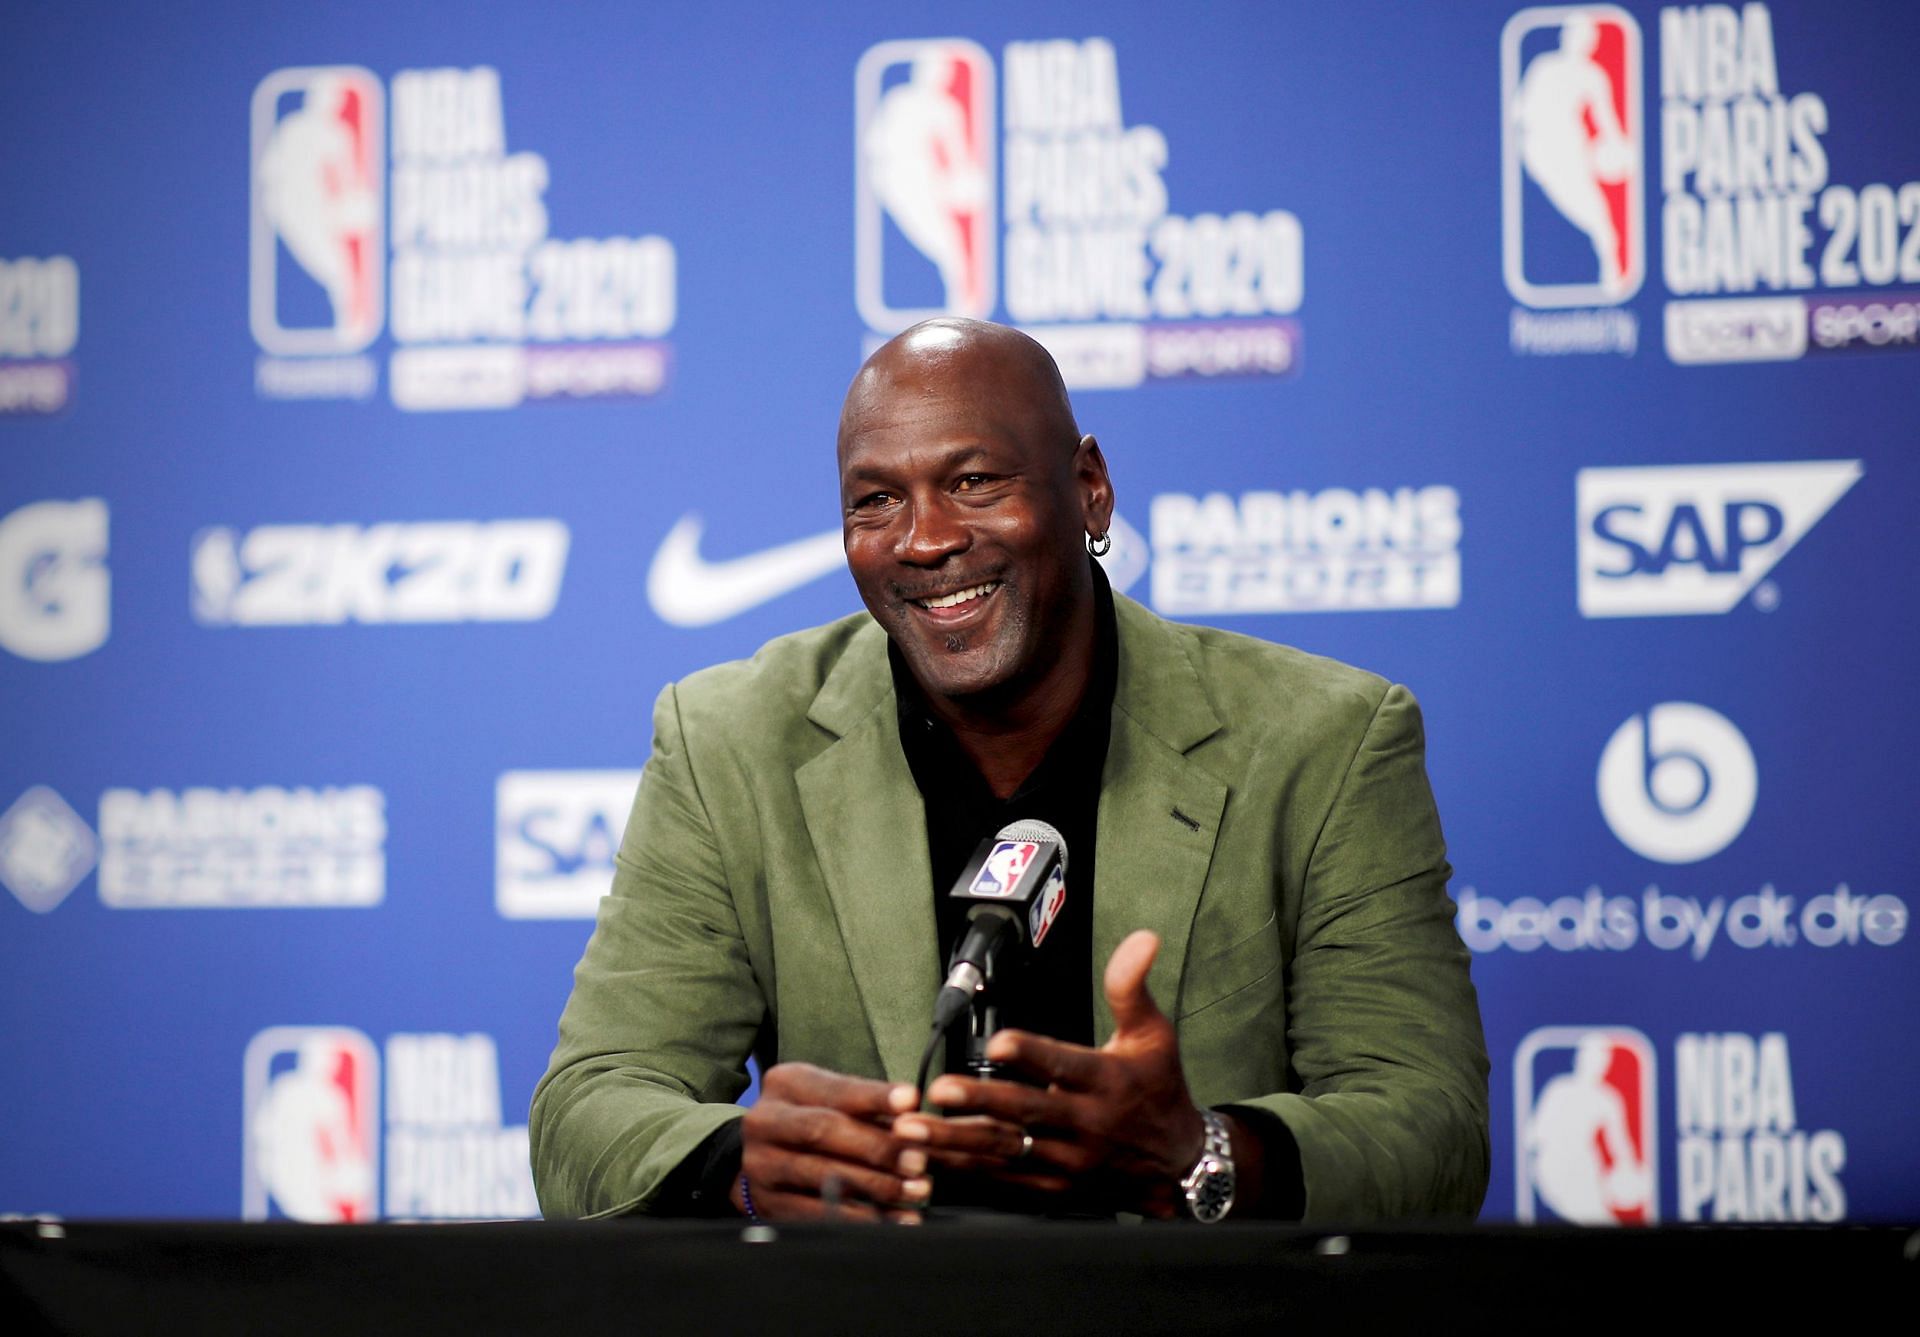 Michael Jordan is the richest athlete in the world